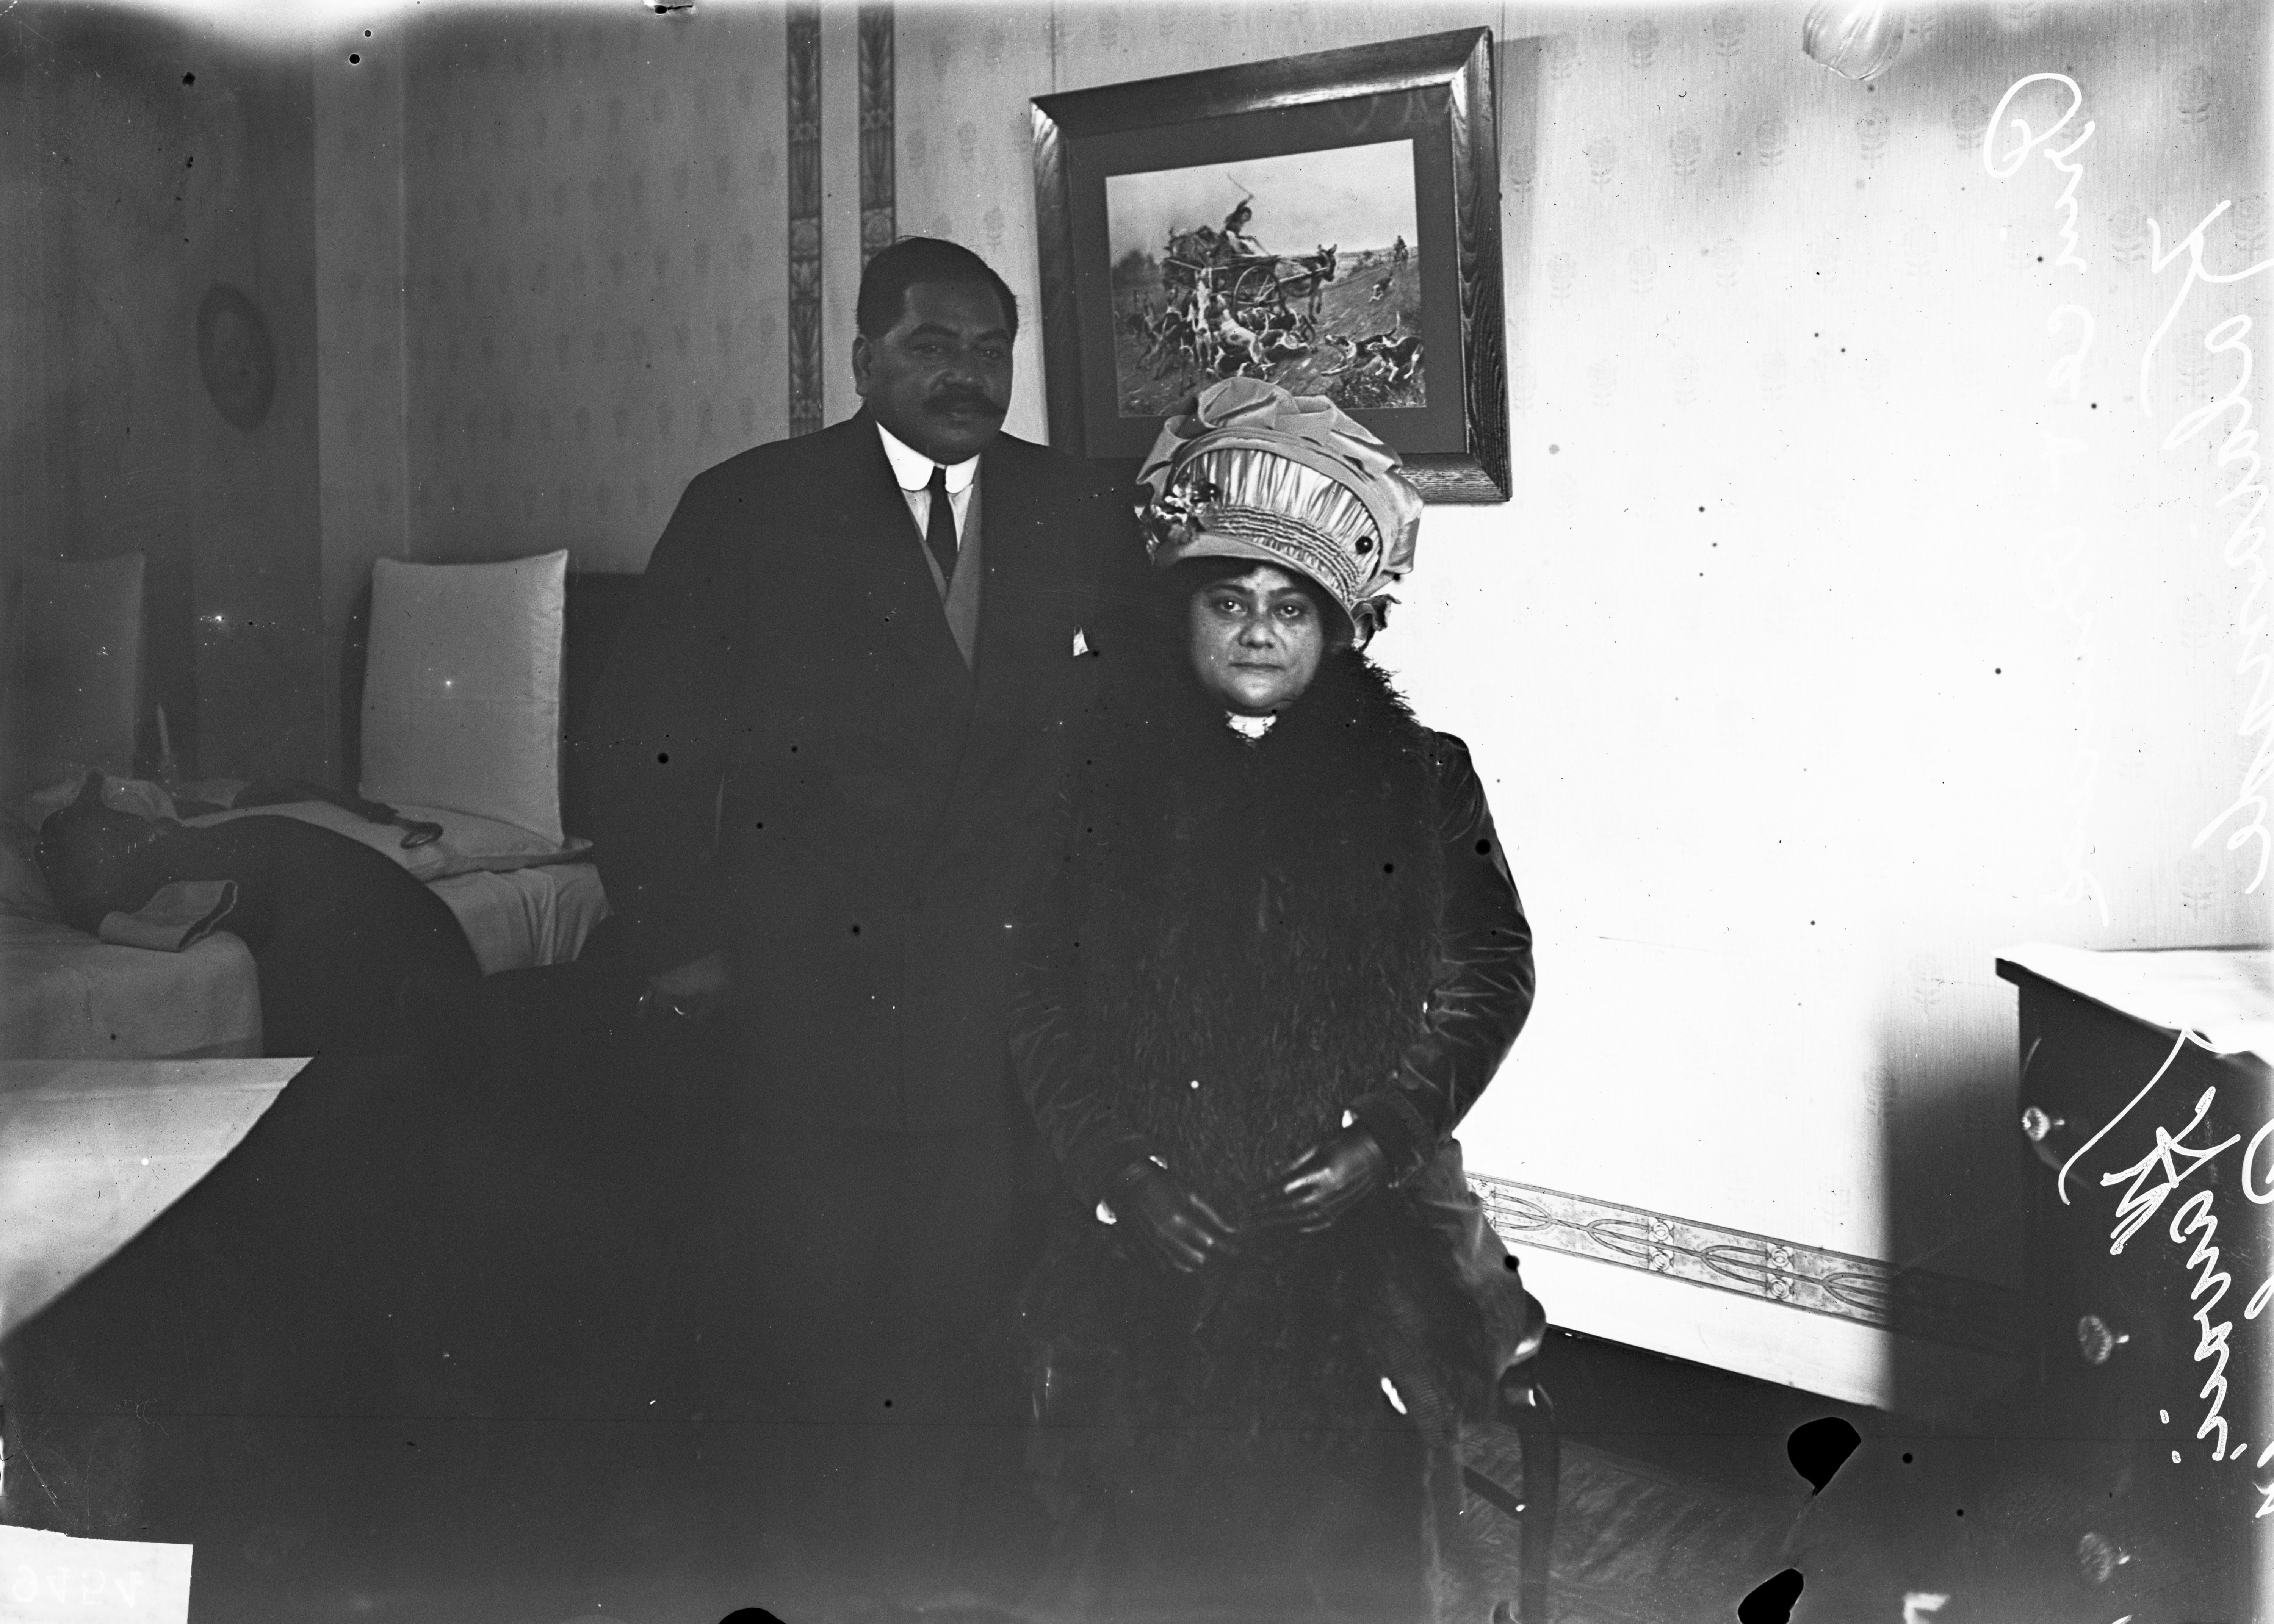 Portrait of Prince and Princess Kalanianade of Hawaii, posed in a room in Chicago, Illinois.